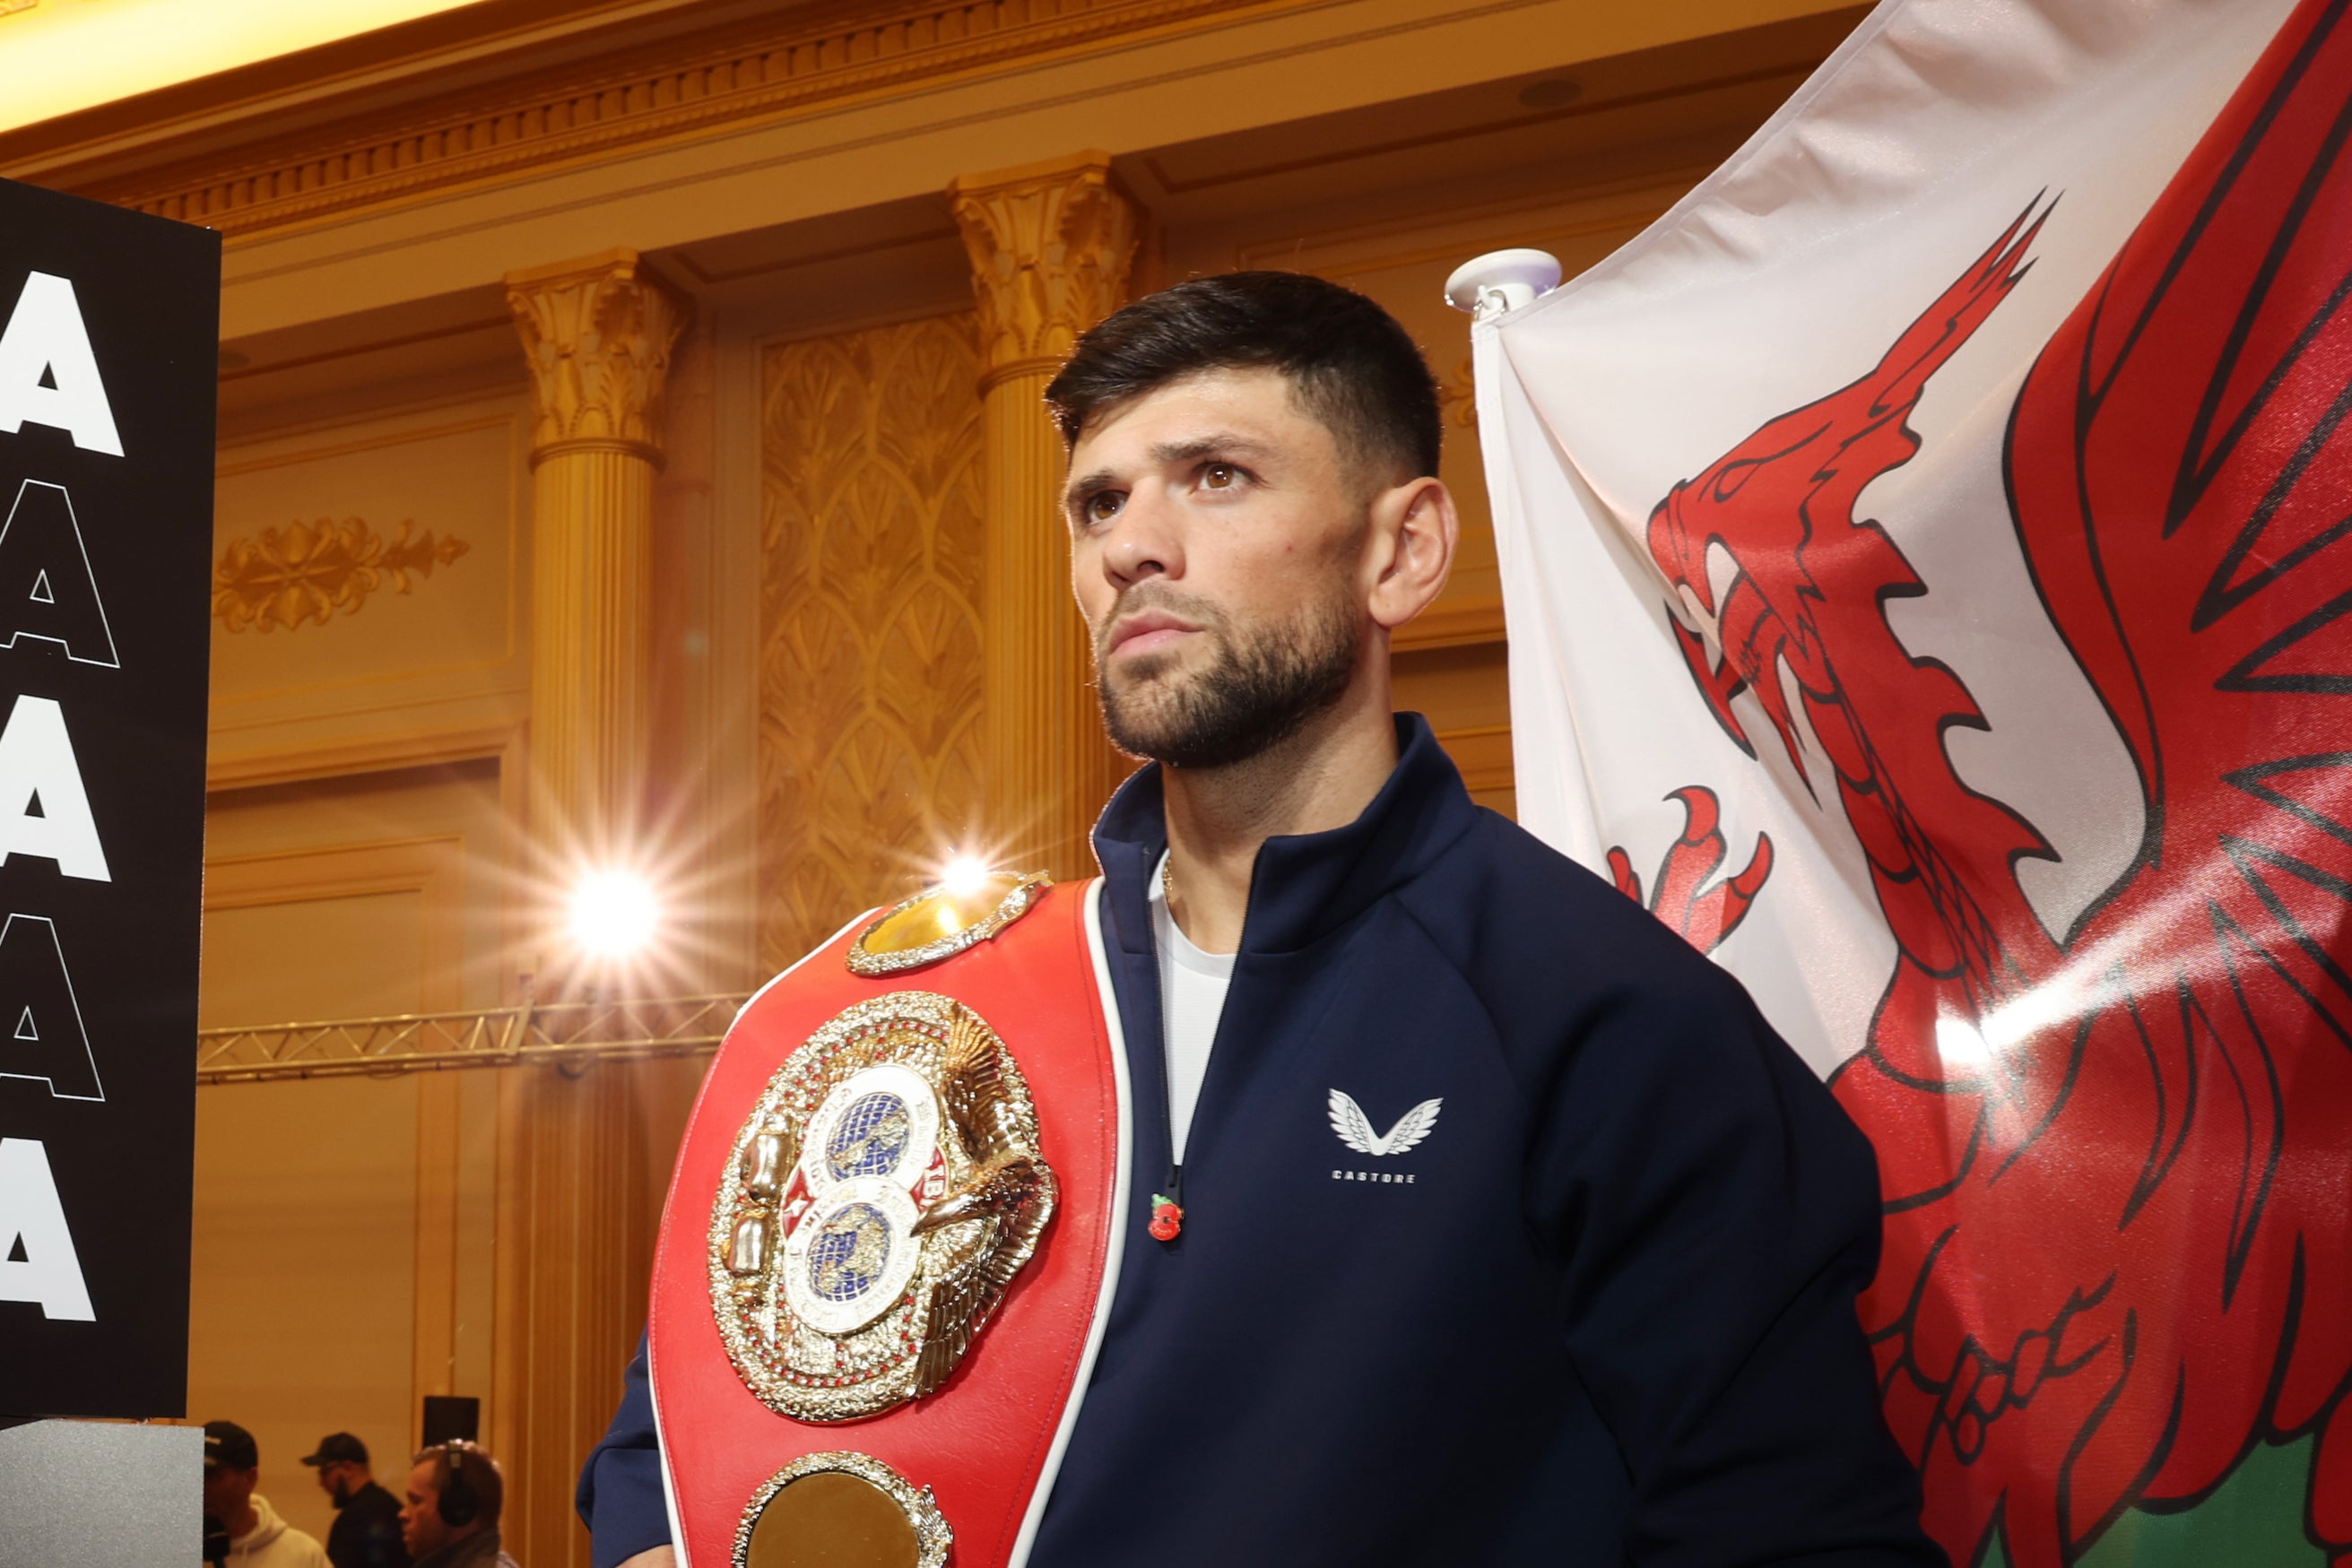 Cordina at the press conference for his title defence against Vazquez